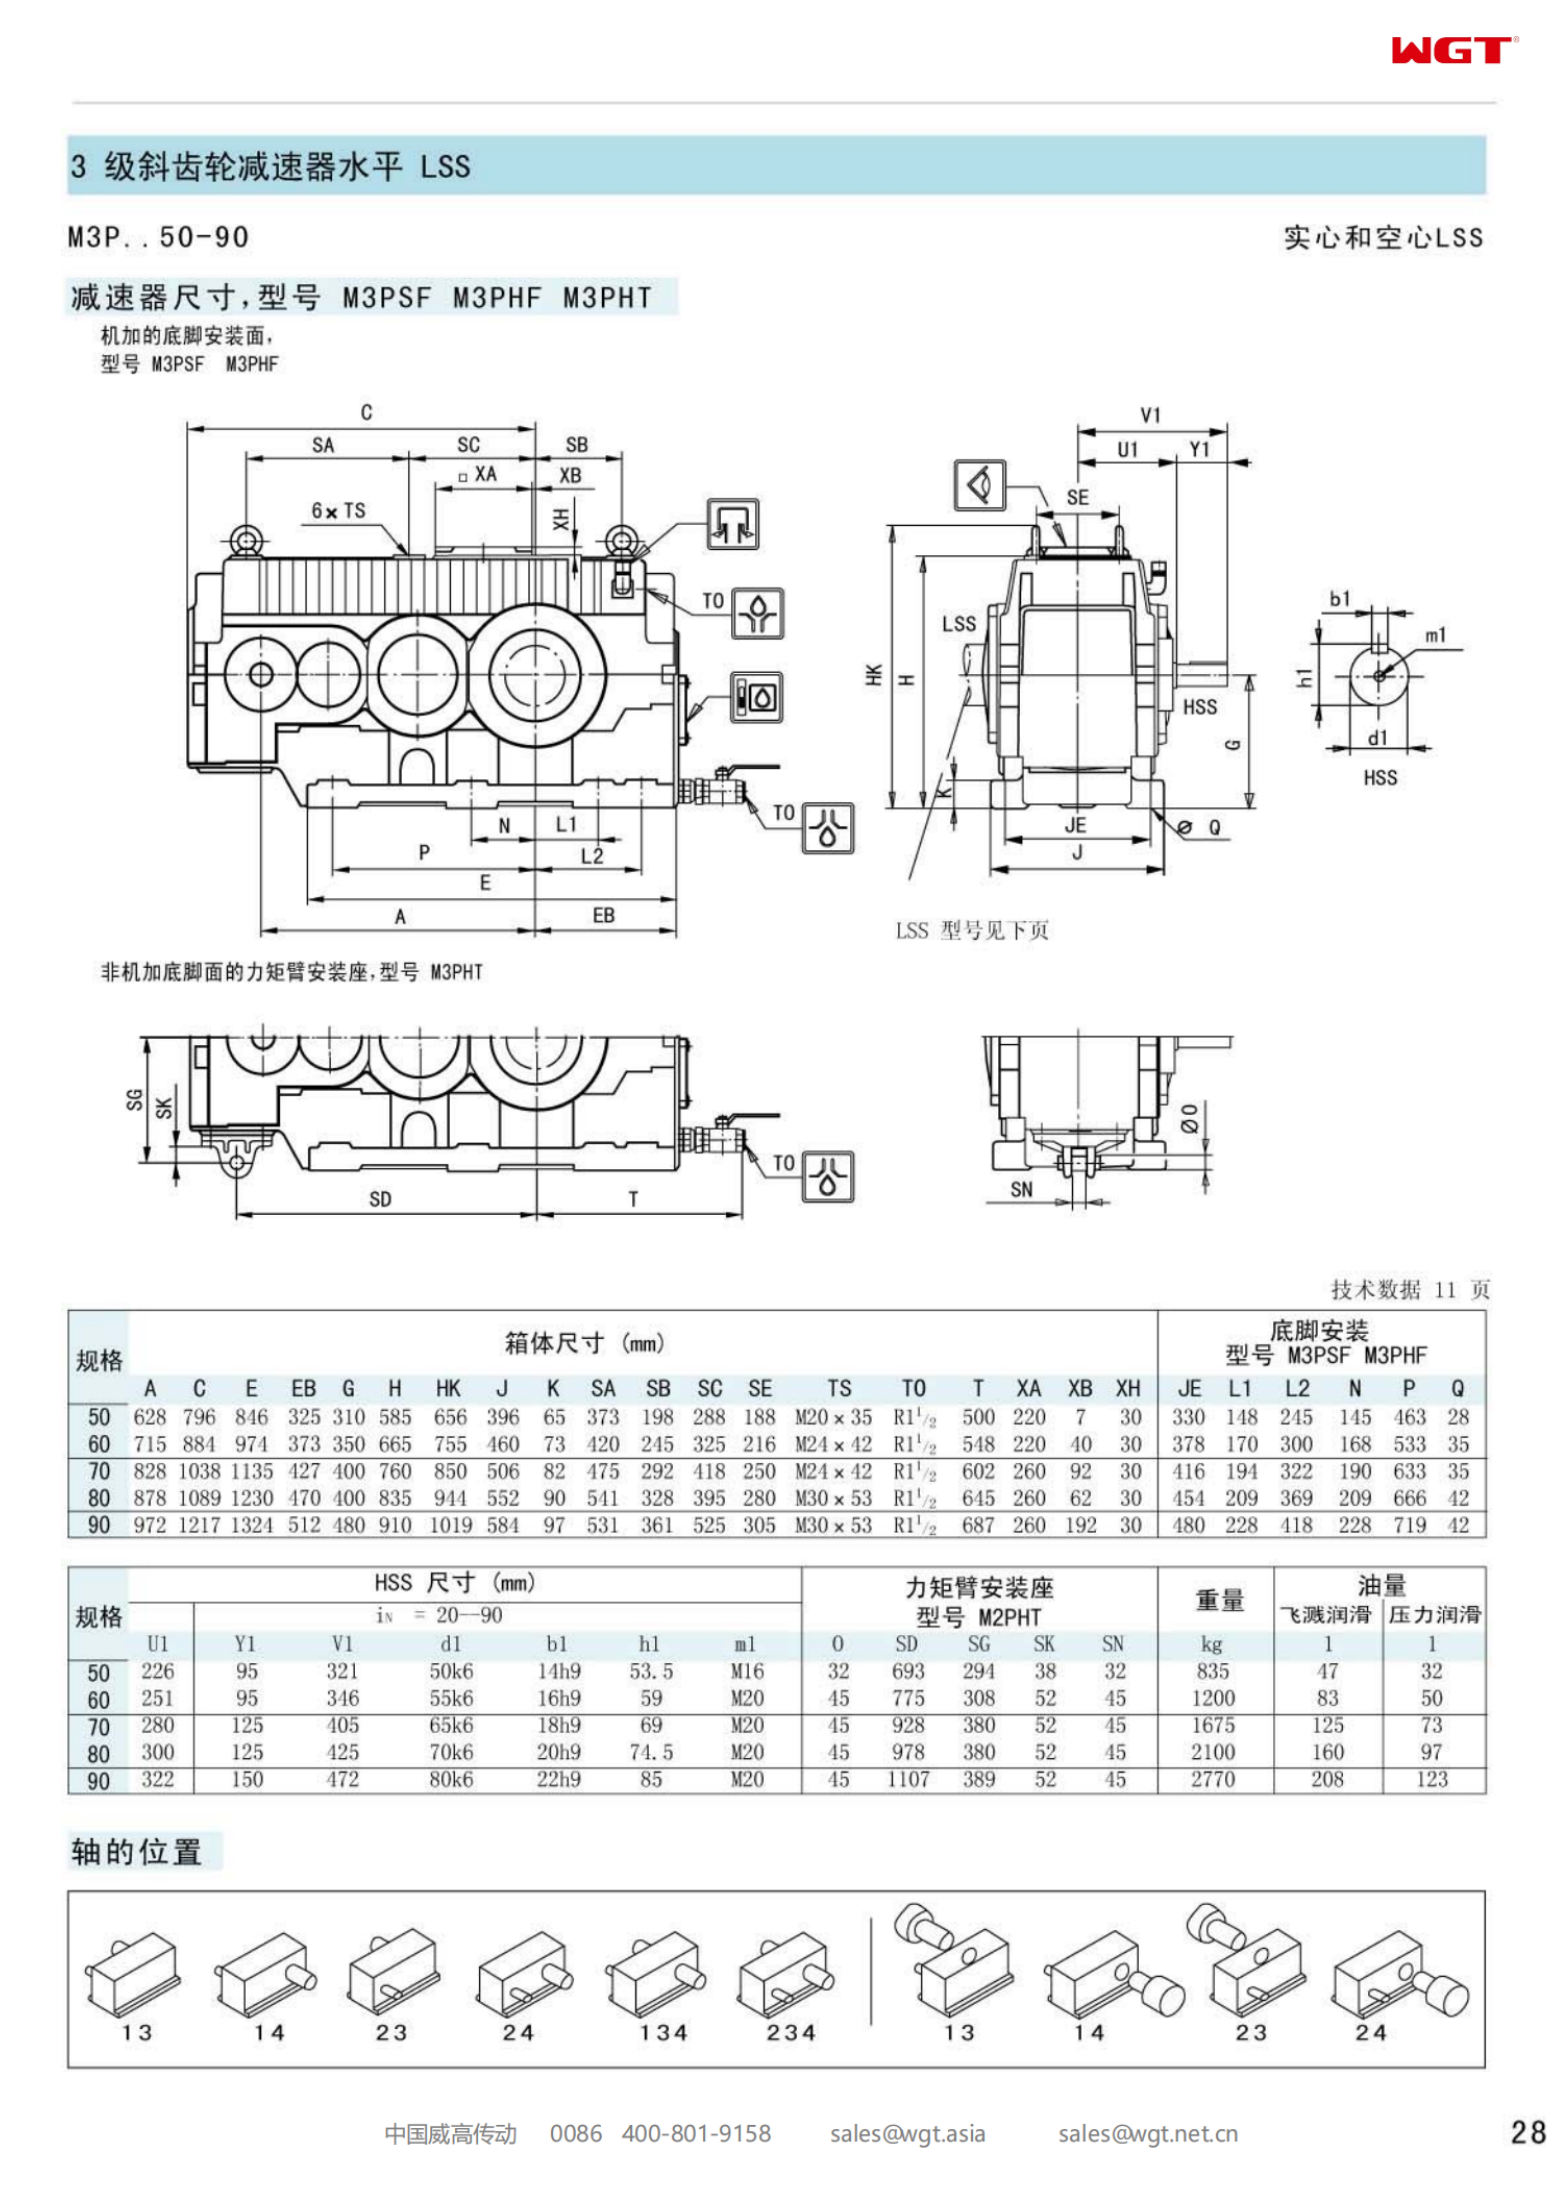 M3PHT80 Replace_SEW_M_Series Gearbox